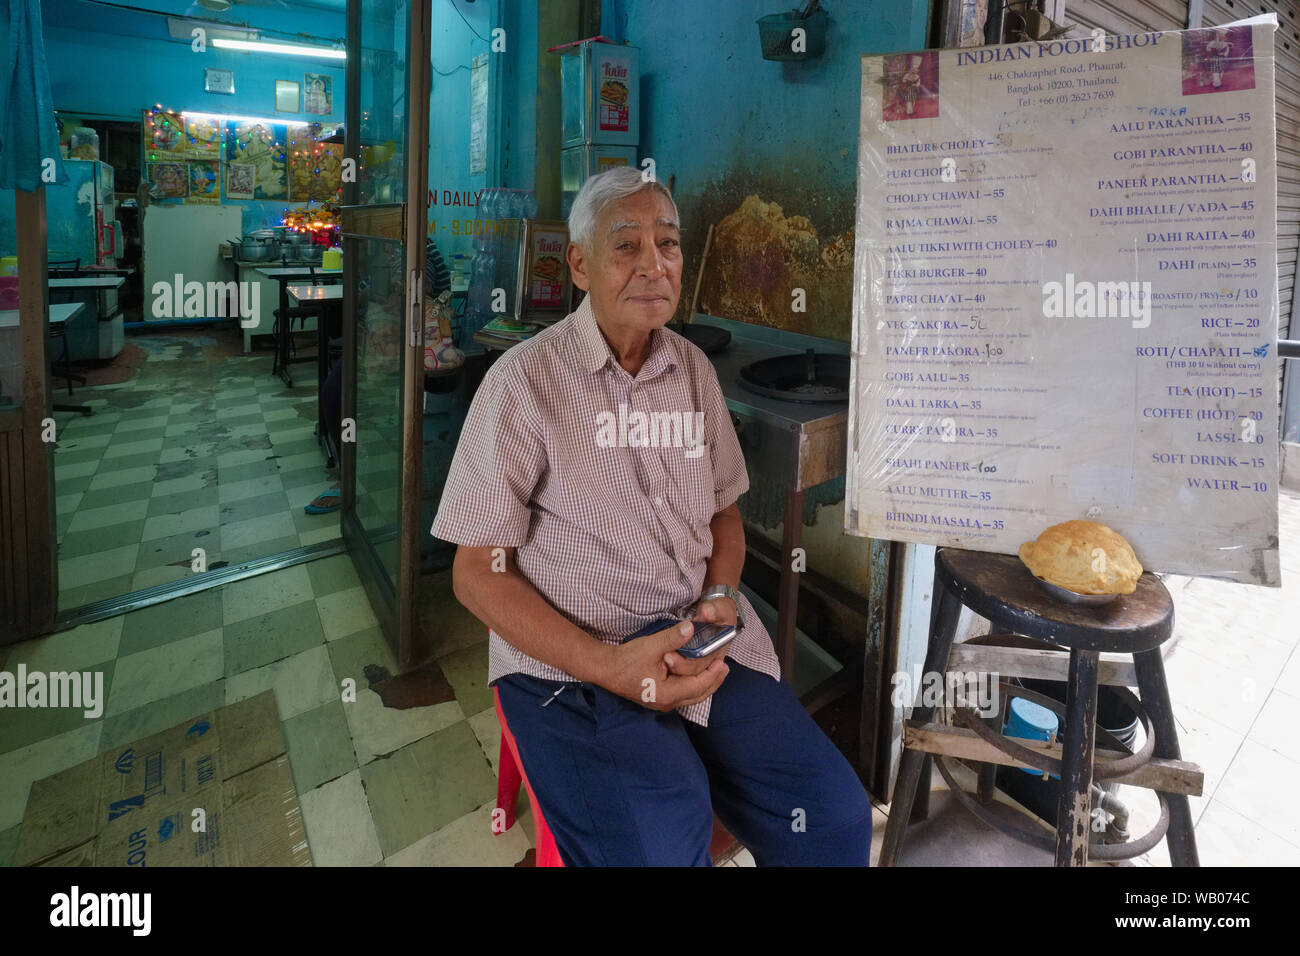 The Indian proprietor sitting outside his small Indian eatery at Pahurat or 'Little India', located next to Chinatown, Bangkok, Thailand Stock Photo